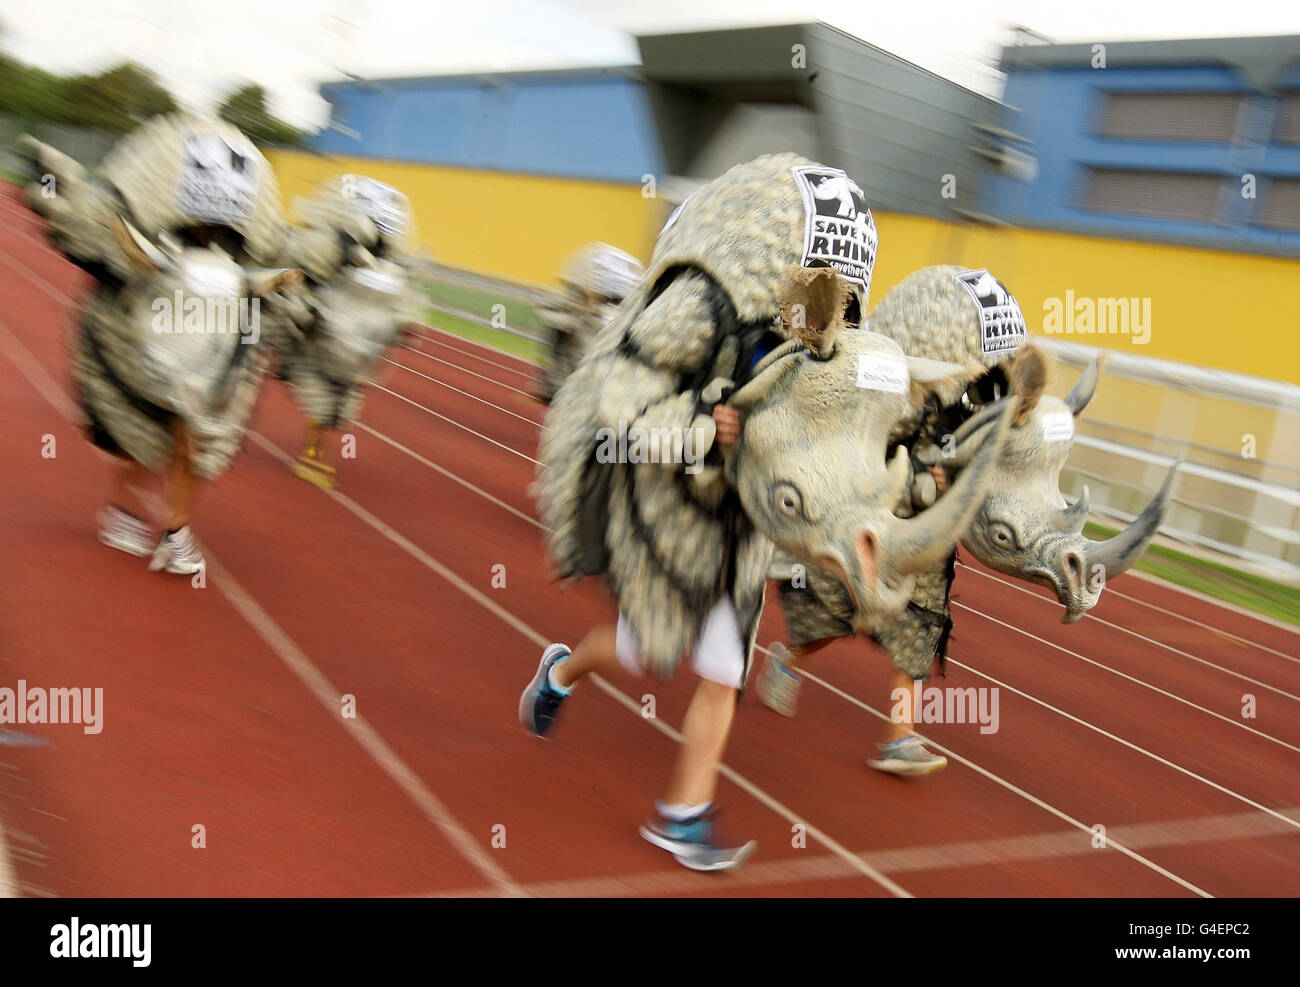 Runners dressed in rhino costumes take part in a 100 metre sprint, organised by Save the Rhino International, at Mile End Park Stadium, east London, to highlight the work of the charity, which conserves populations of critically endangered rhinos in Africa and Asia. Stock Photo